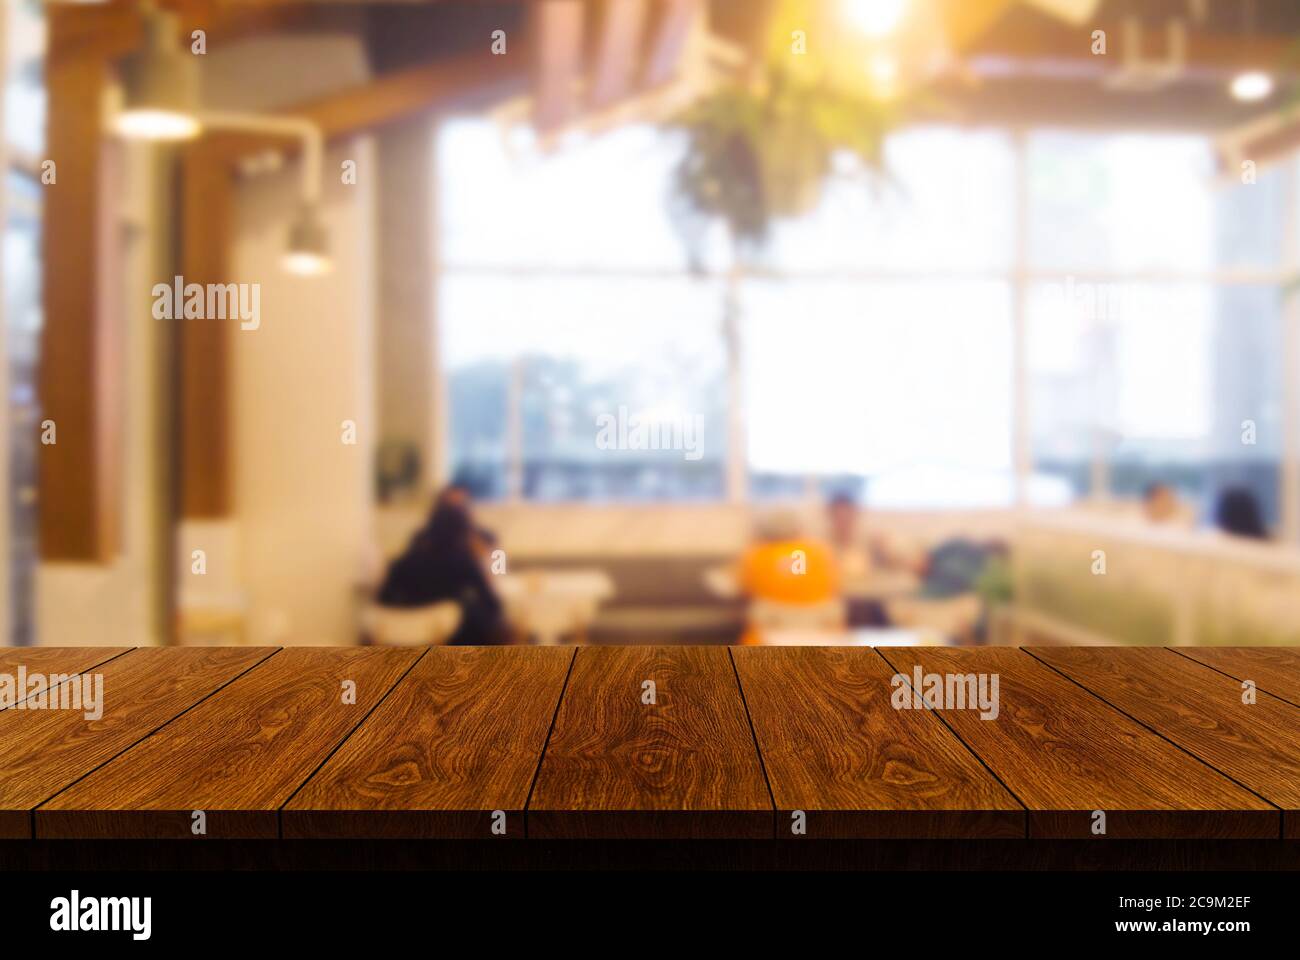 Wood table in blur background of modern restaurant Stock Photo